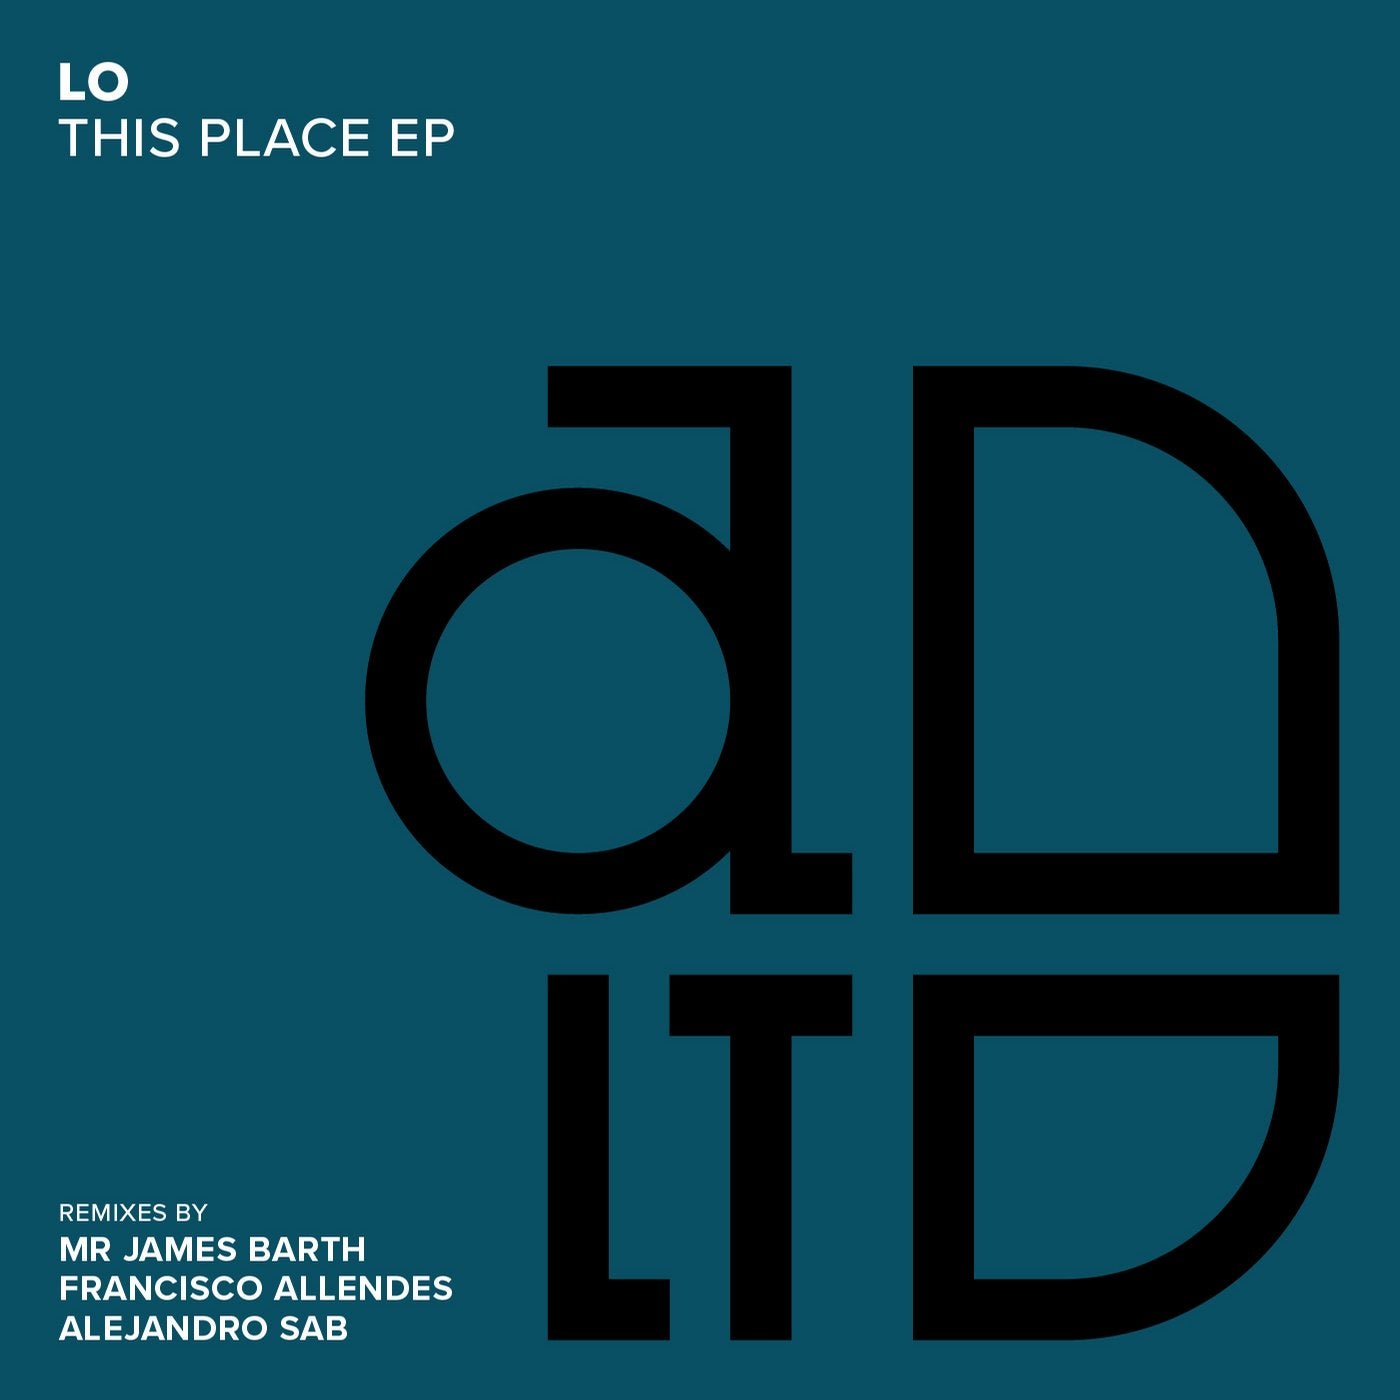 LO This Place EP